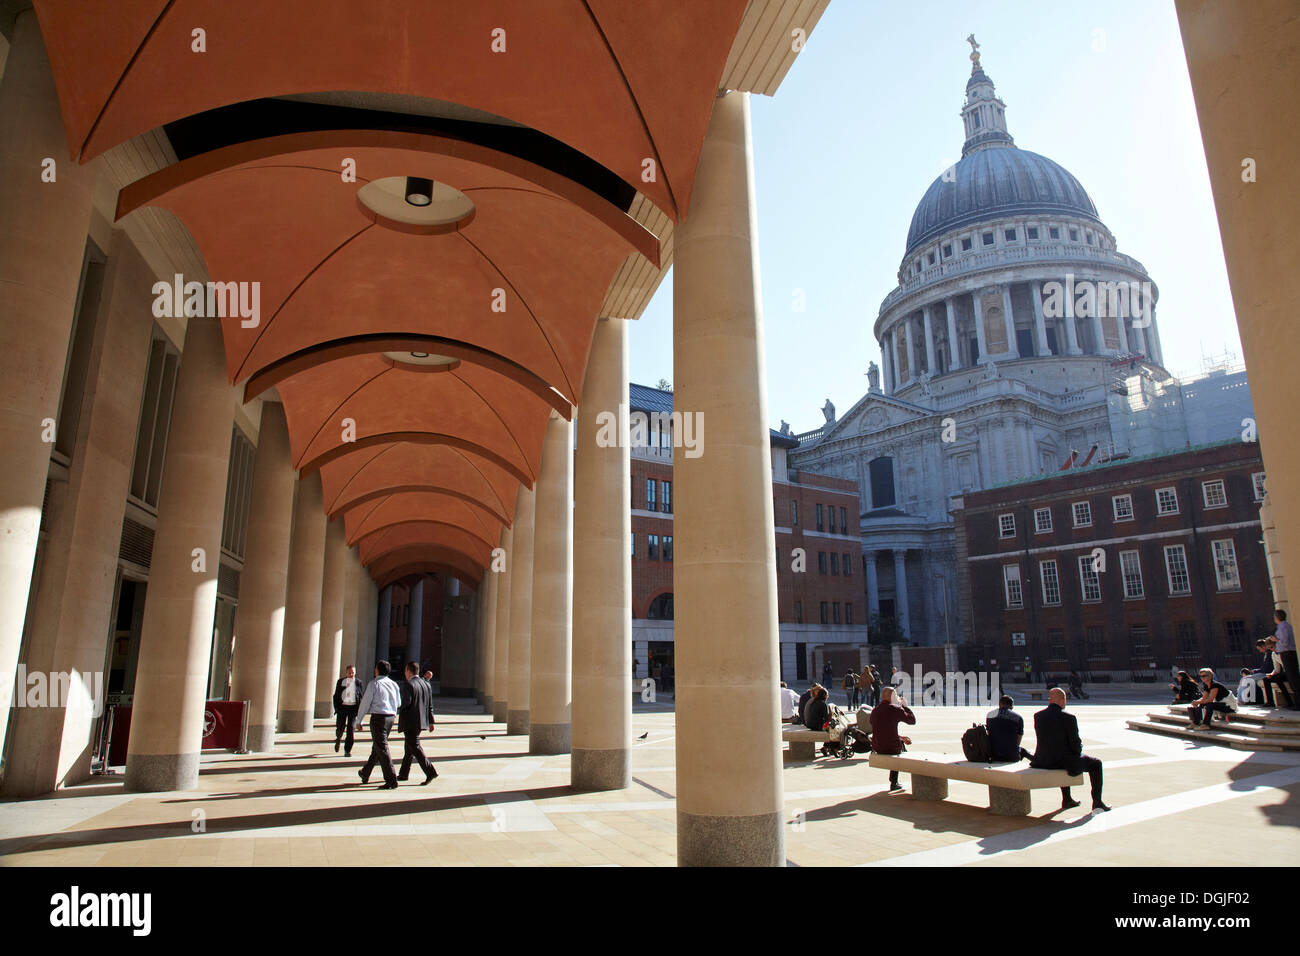 St Paul's Cathedral and Paternoster Square. Stock Photo